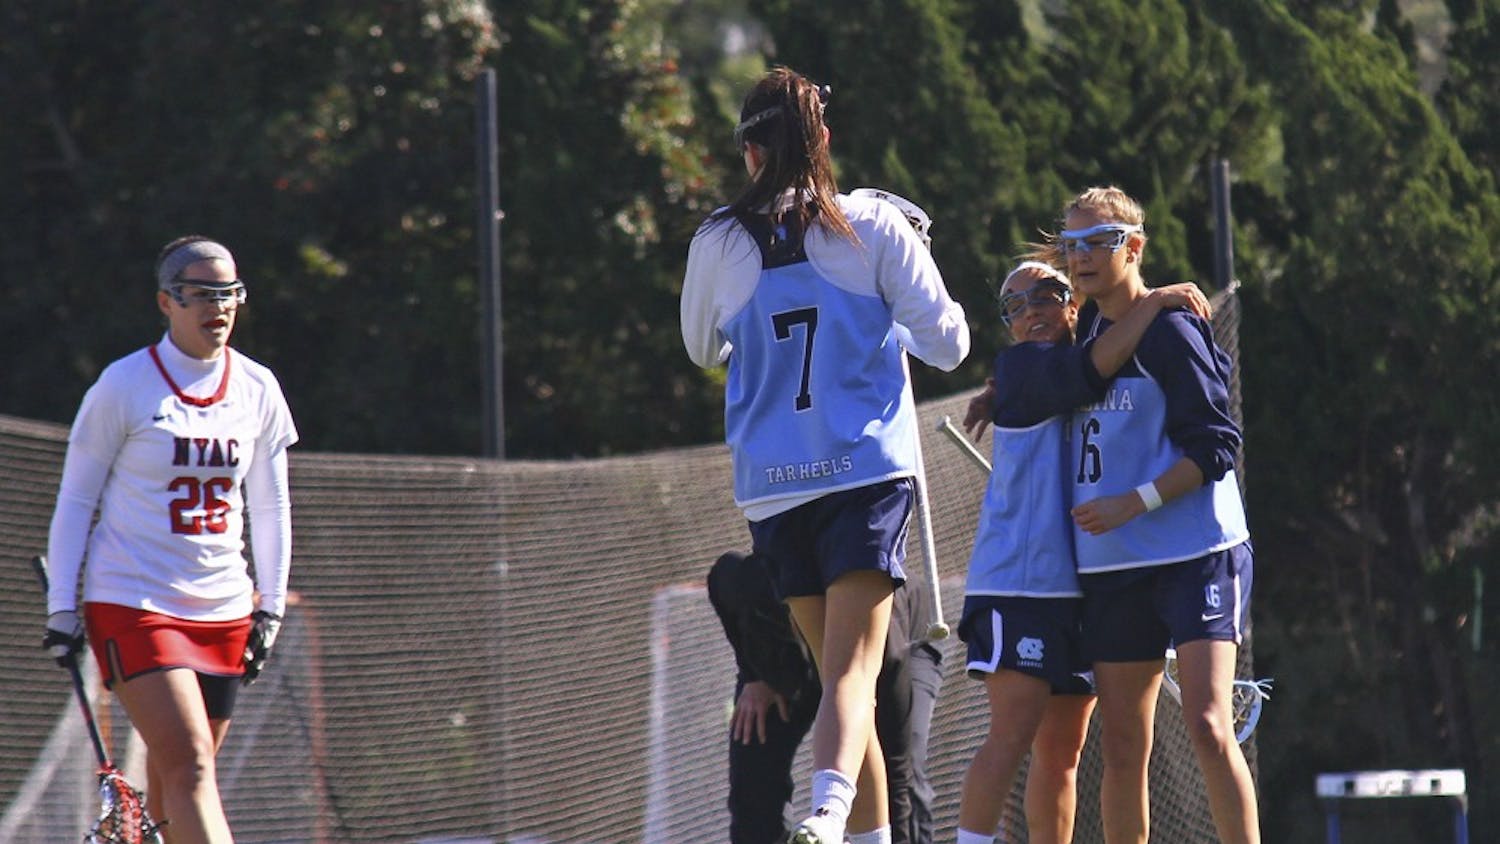 Women's lax held a scrimmage with a visiting alumni team on Saturday morning.